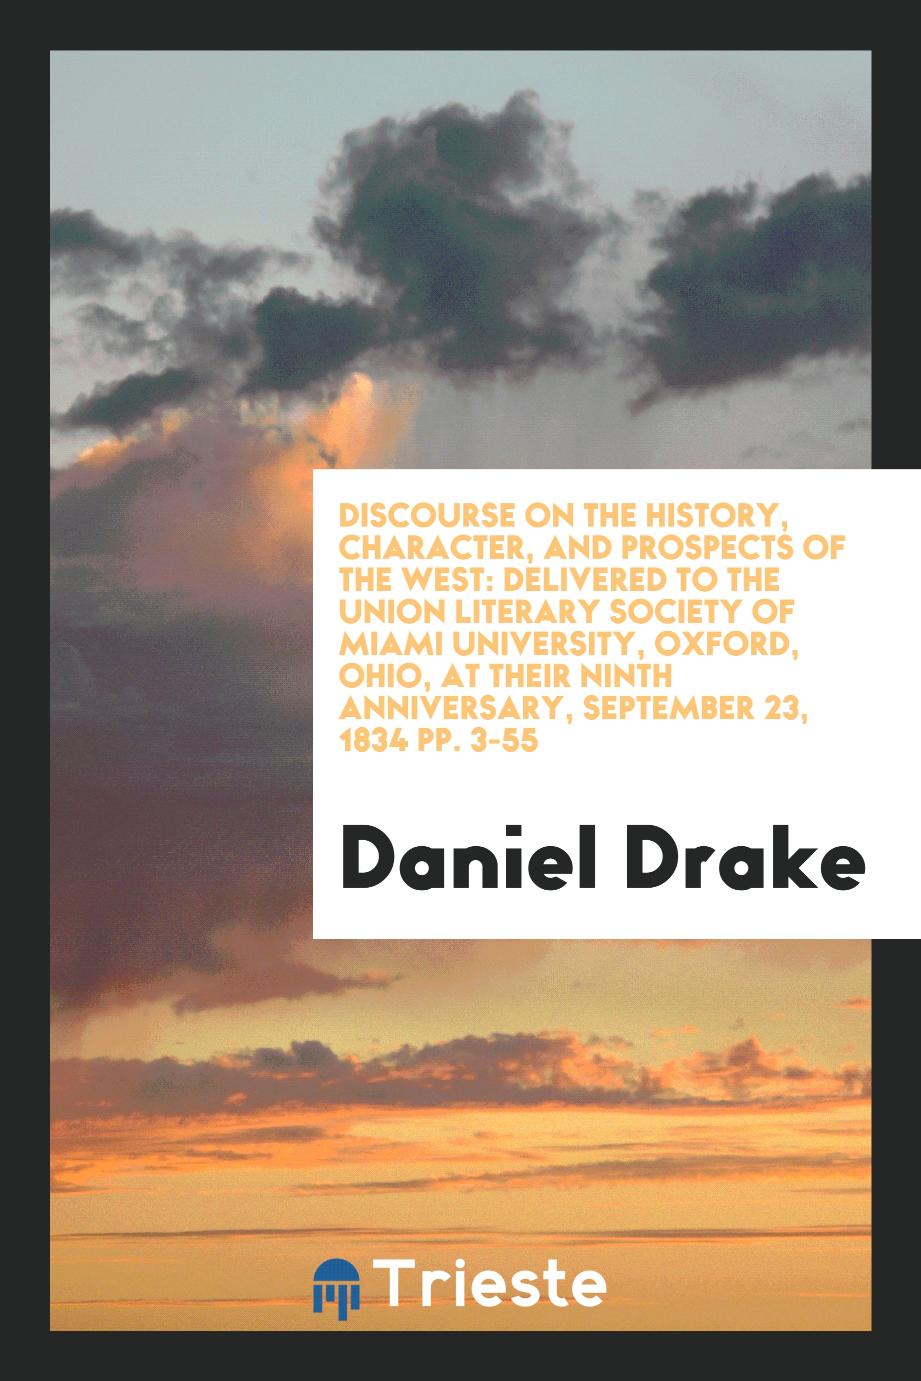 Discourse on the history, character, and prospects of the West: delivered to the Union literary society of Miami University, Oxford, Ohio, at their ninth anniversary, September 23, 1834 pp. 3-55